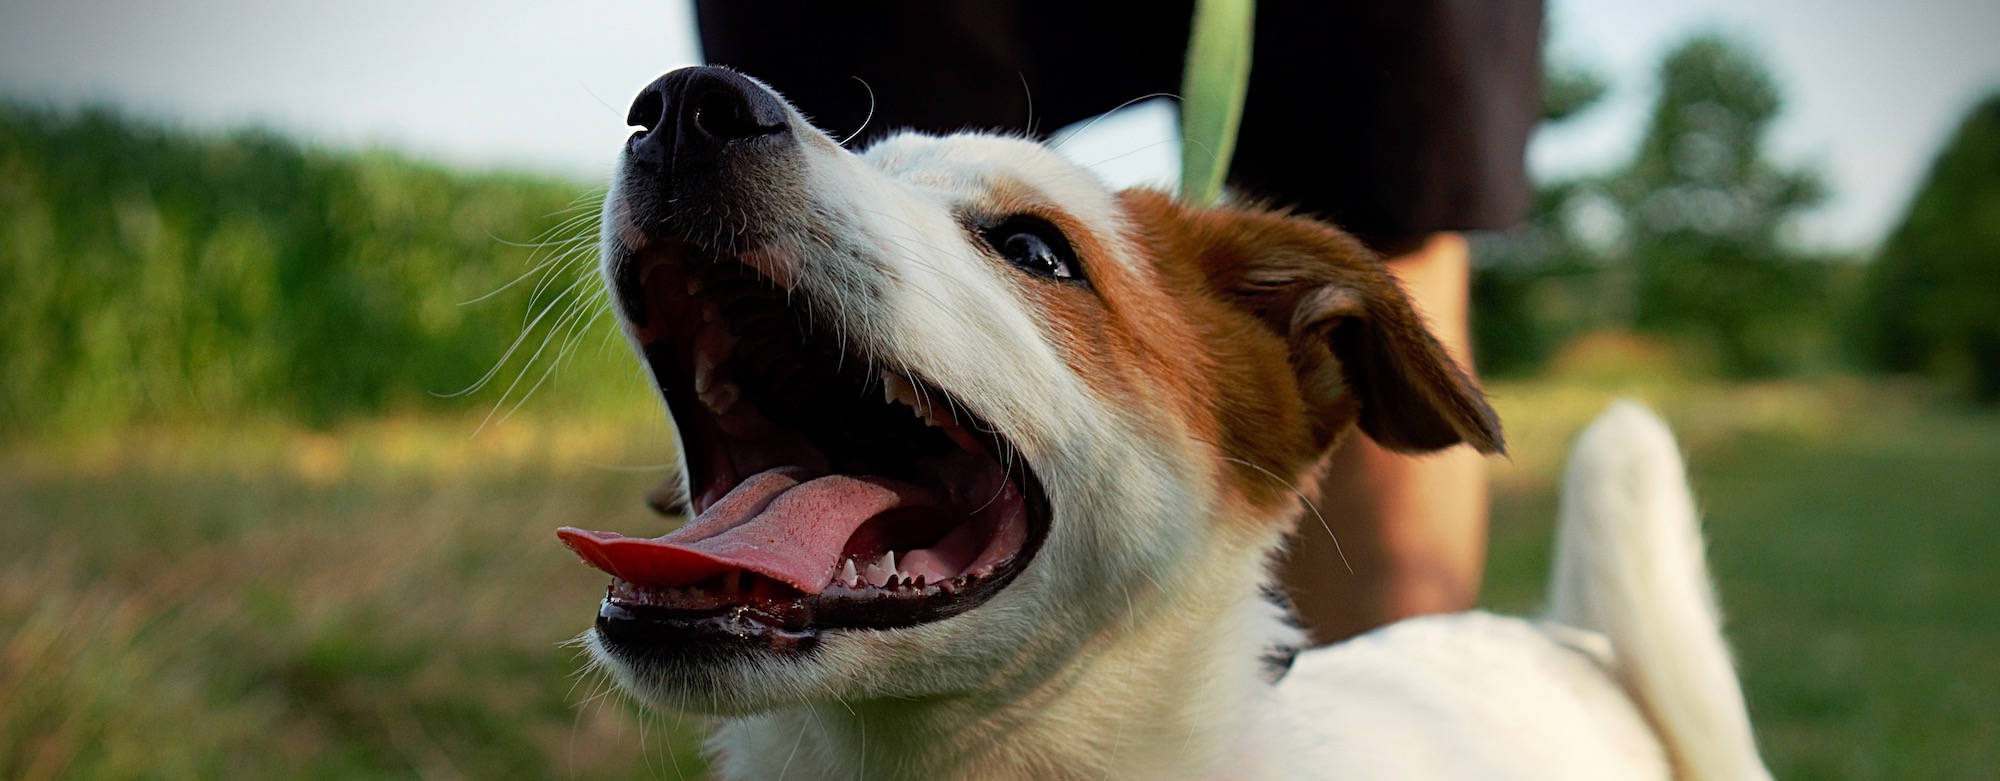 Natural Remedies For Dogs With Bad Breath - The Farmer's Dog